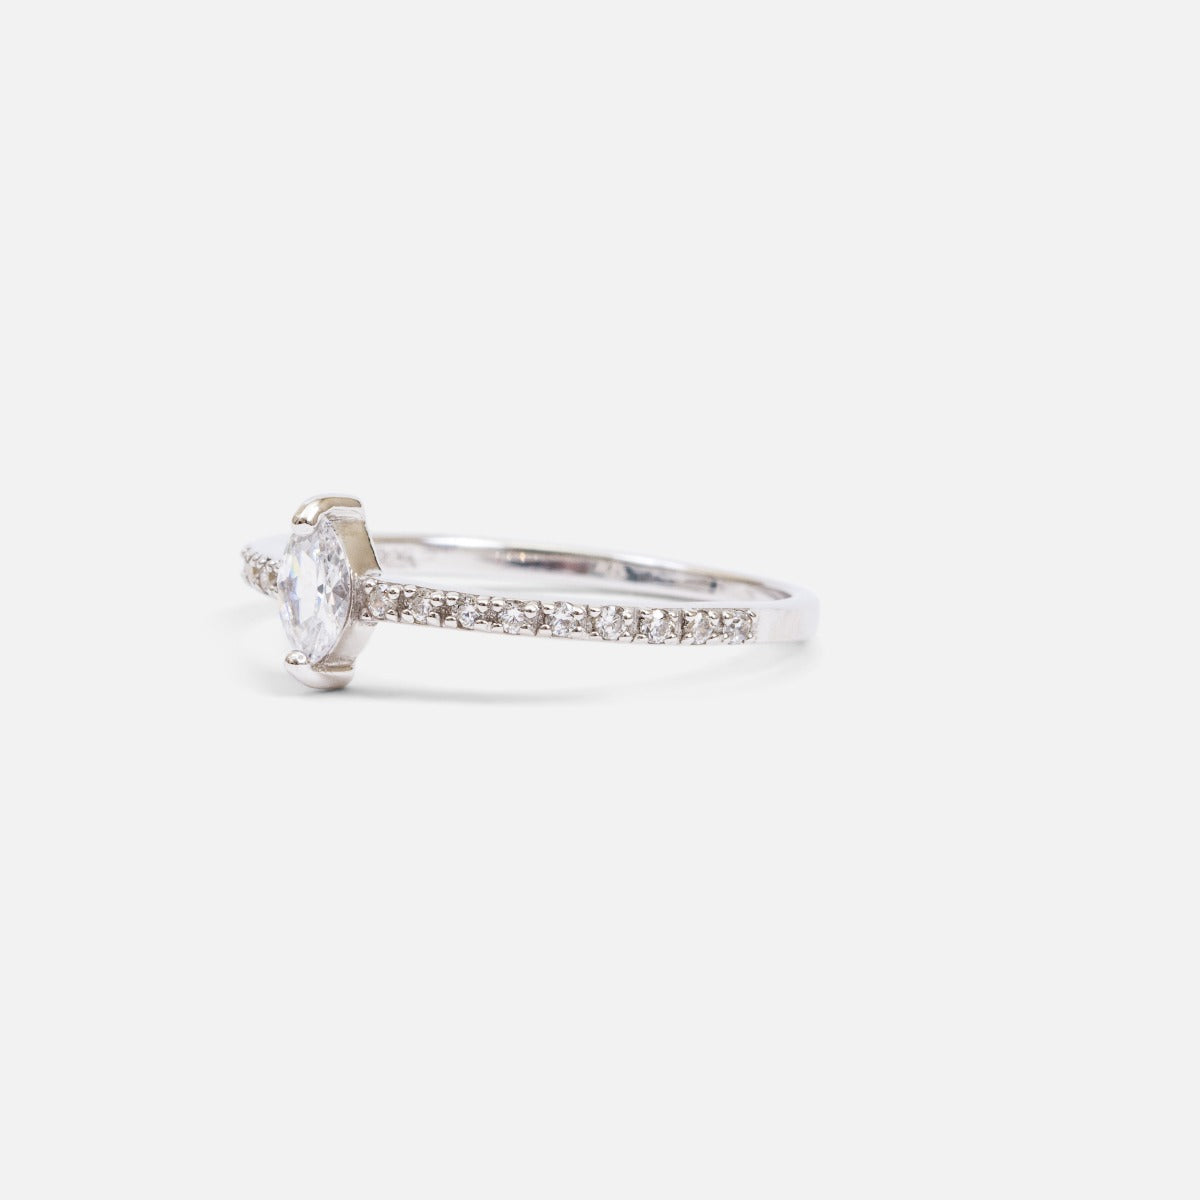 Sterling silver ring with multiple cubic zirconia